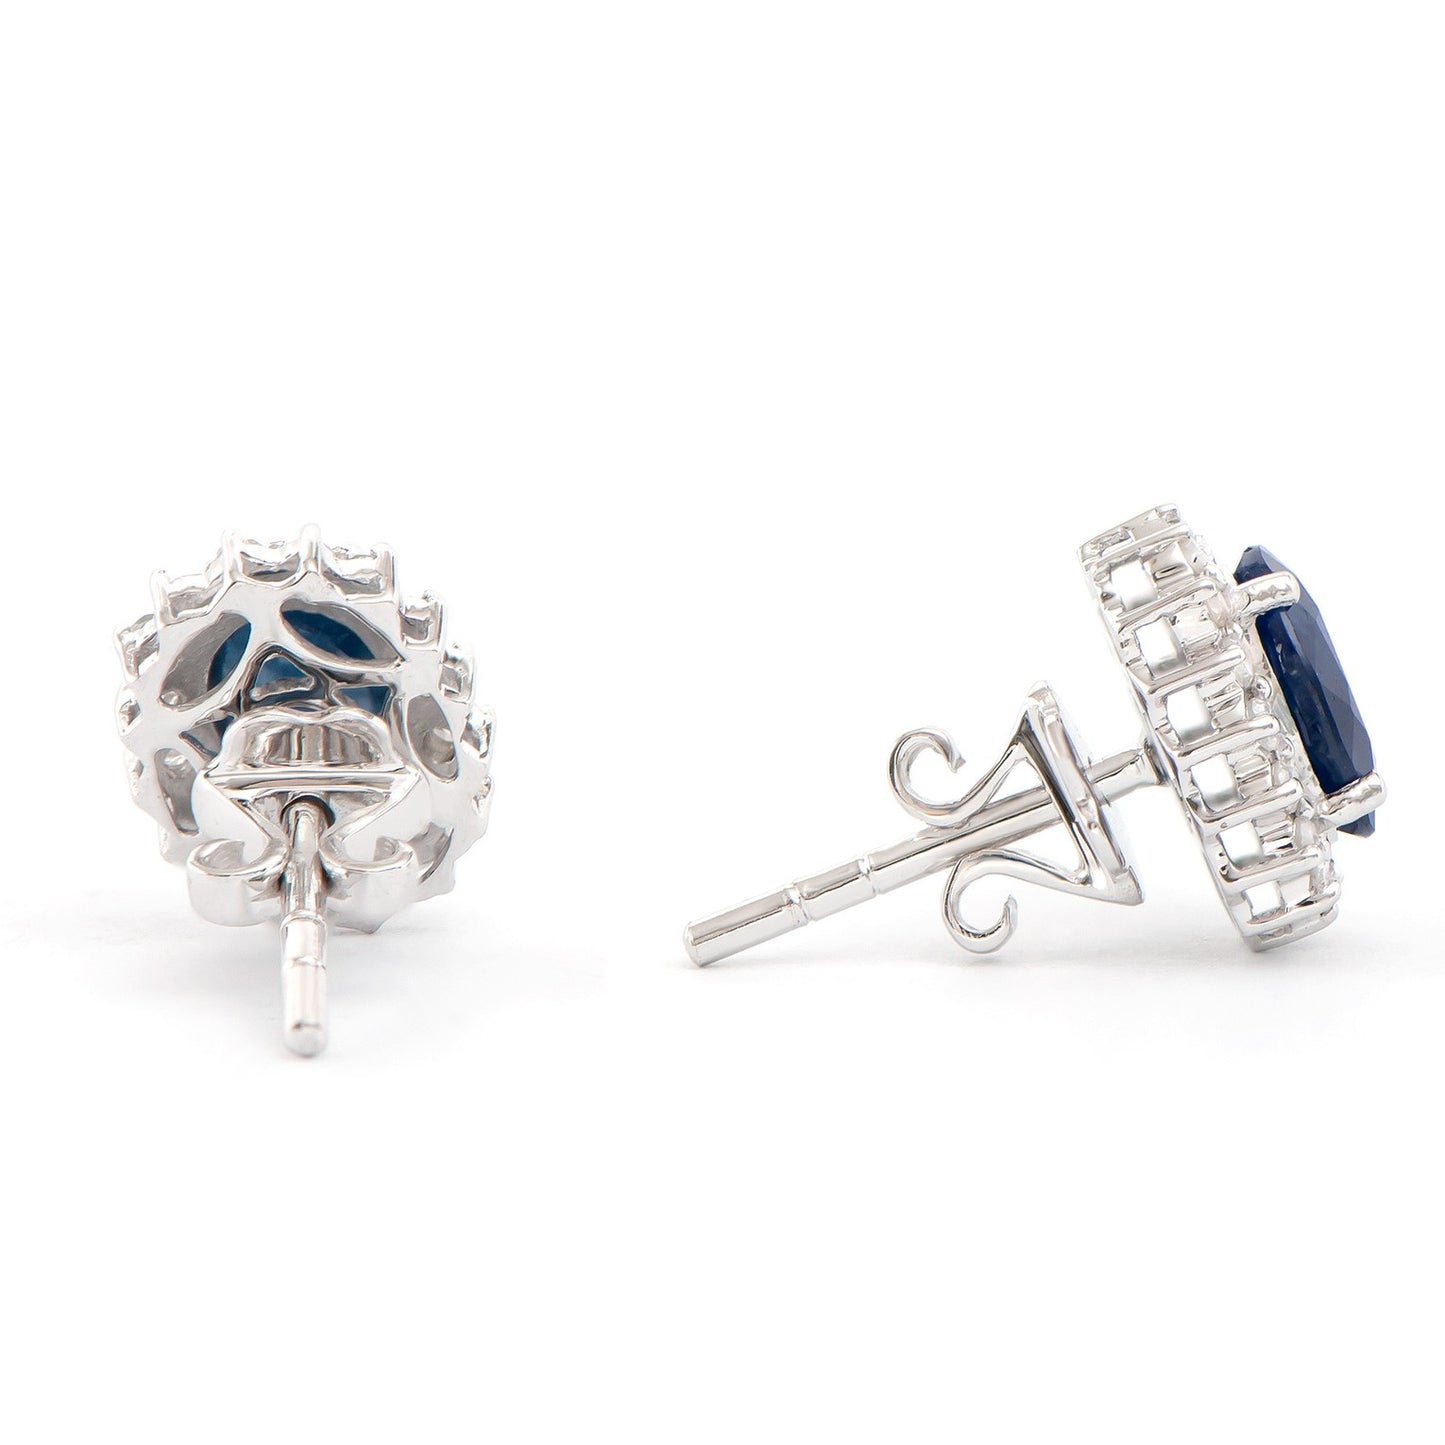 14KT White Gold 2.05ctw Blue Sapphire and Diamond Earrings